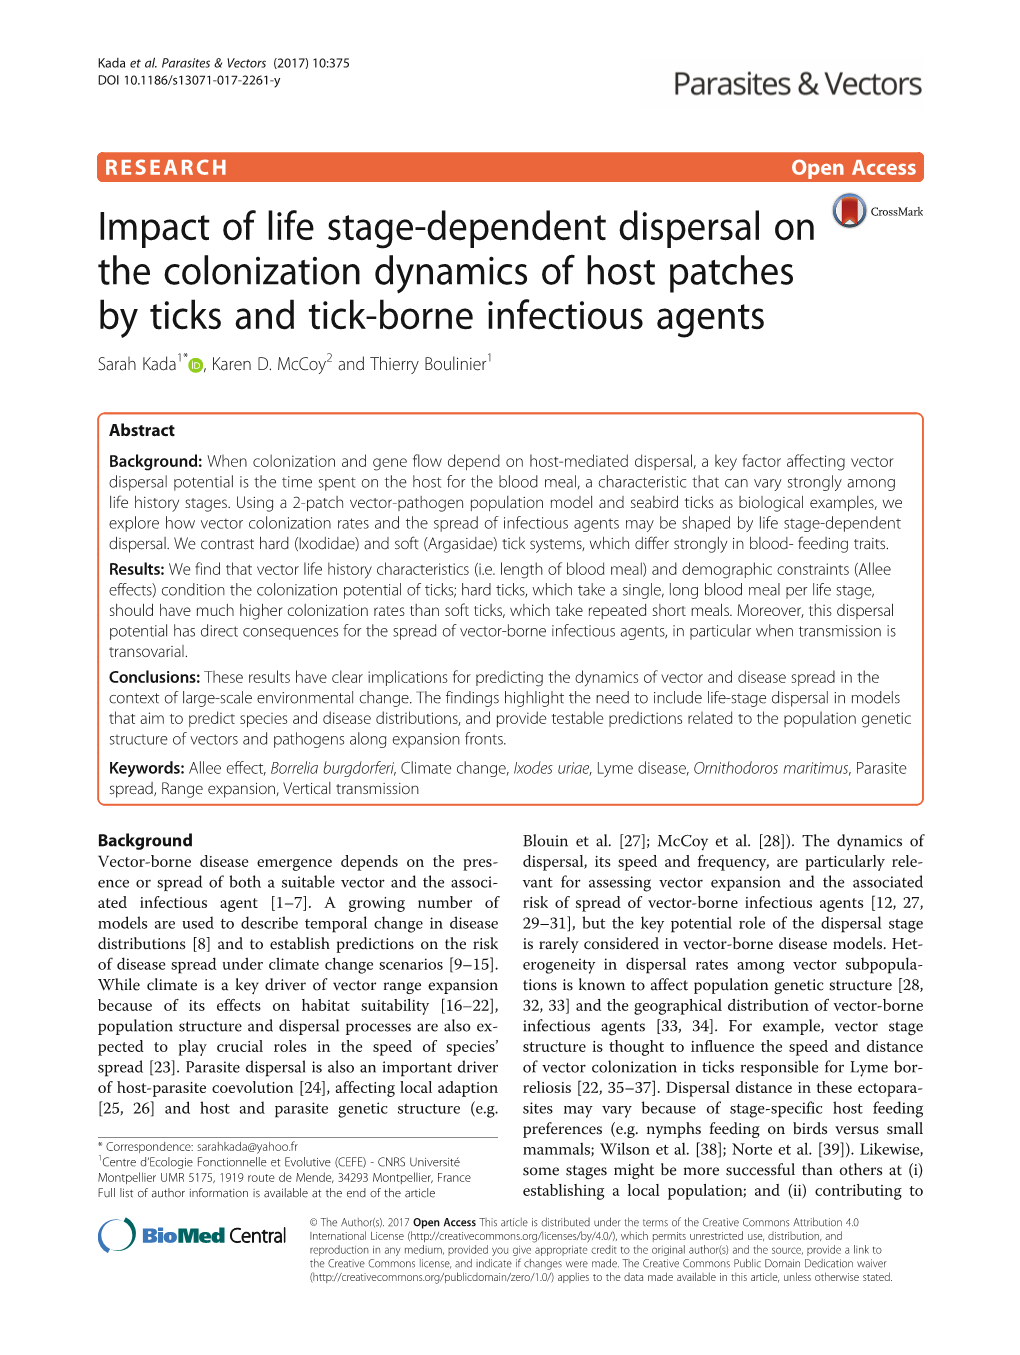 Impact of Life Stage-Dependent Dispersal on the Colonization Dynamics of Host Patches by Ticks and Tick-Borne Infectious Agents Sarah Kada1* , Karen D